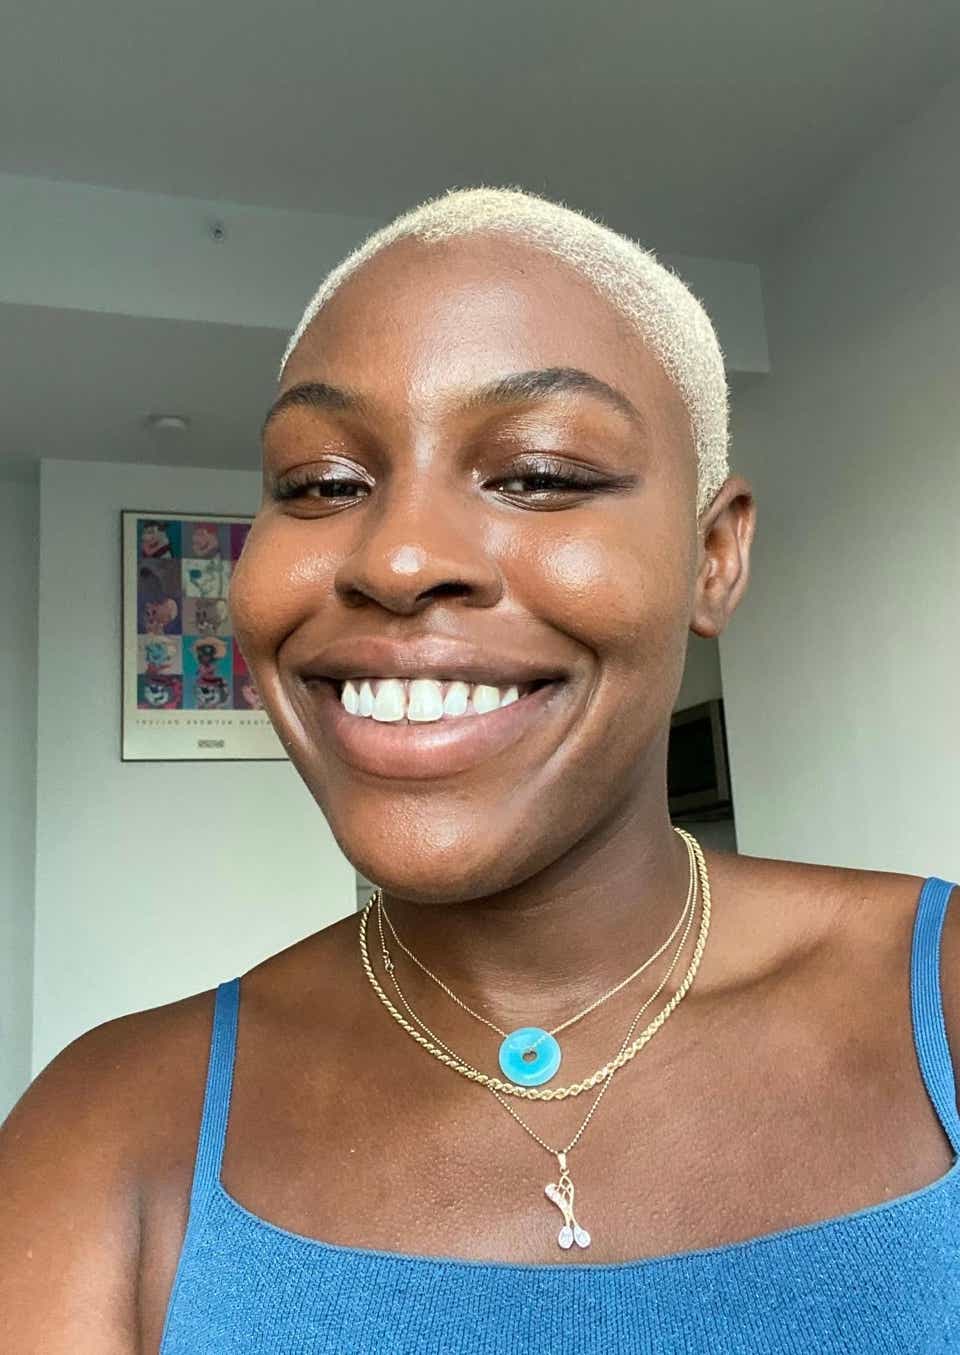 Black Women Share Why They Love Being Blonde